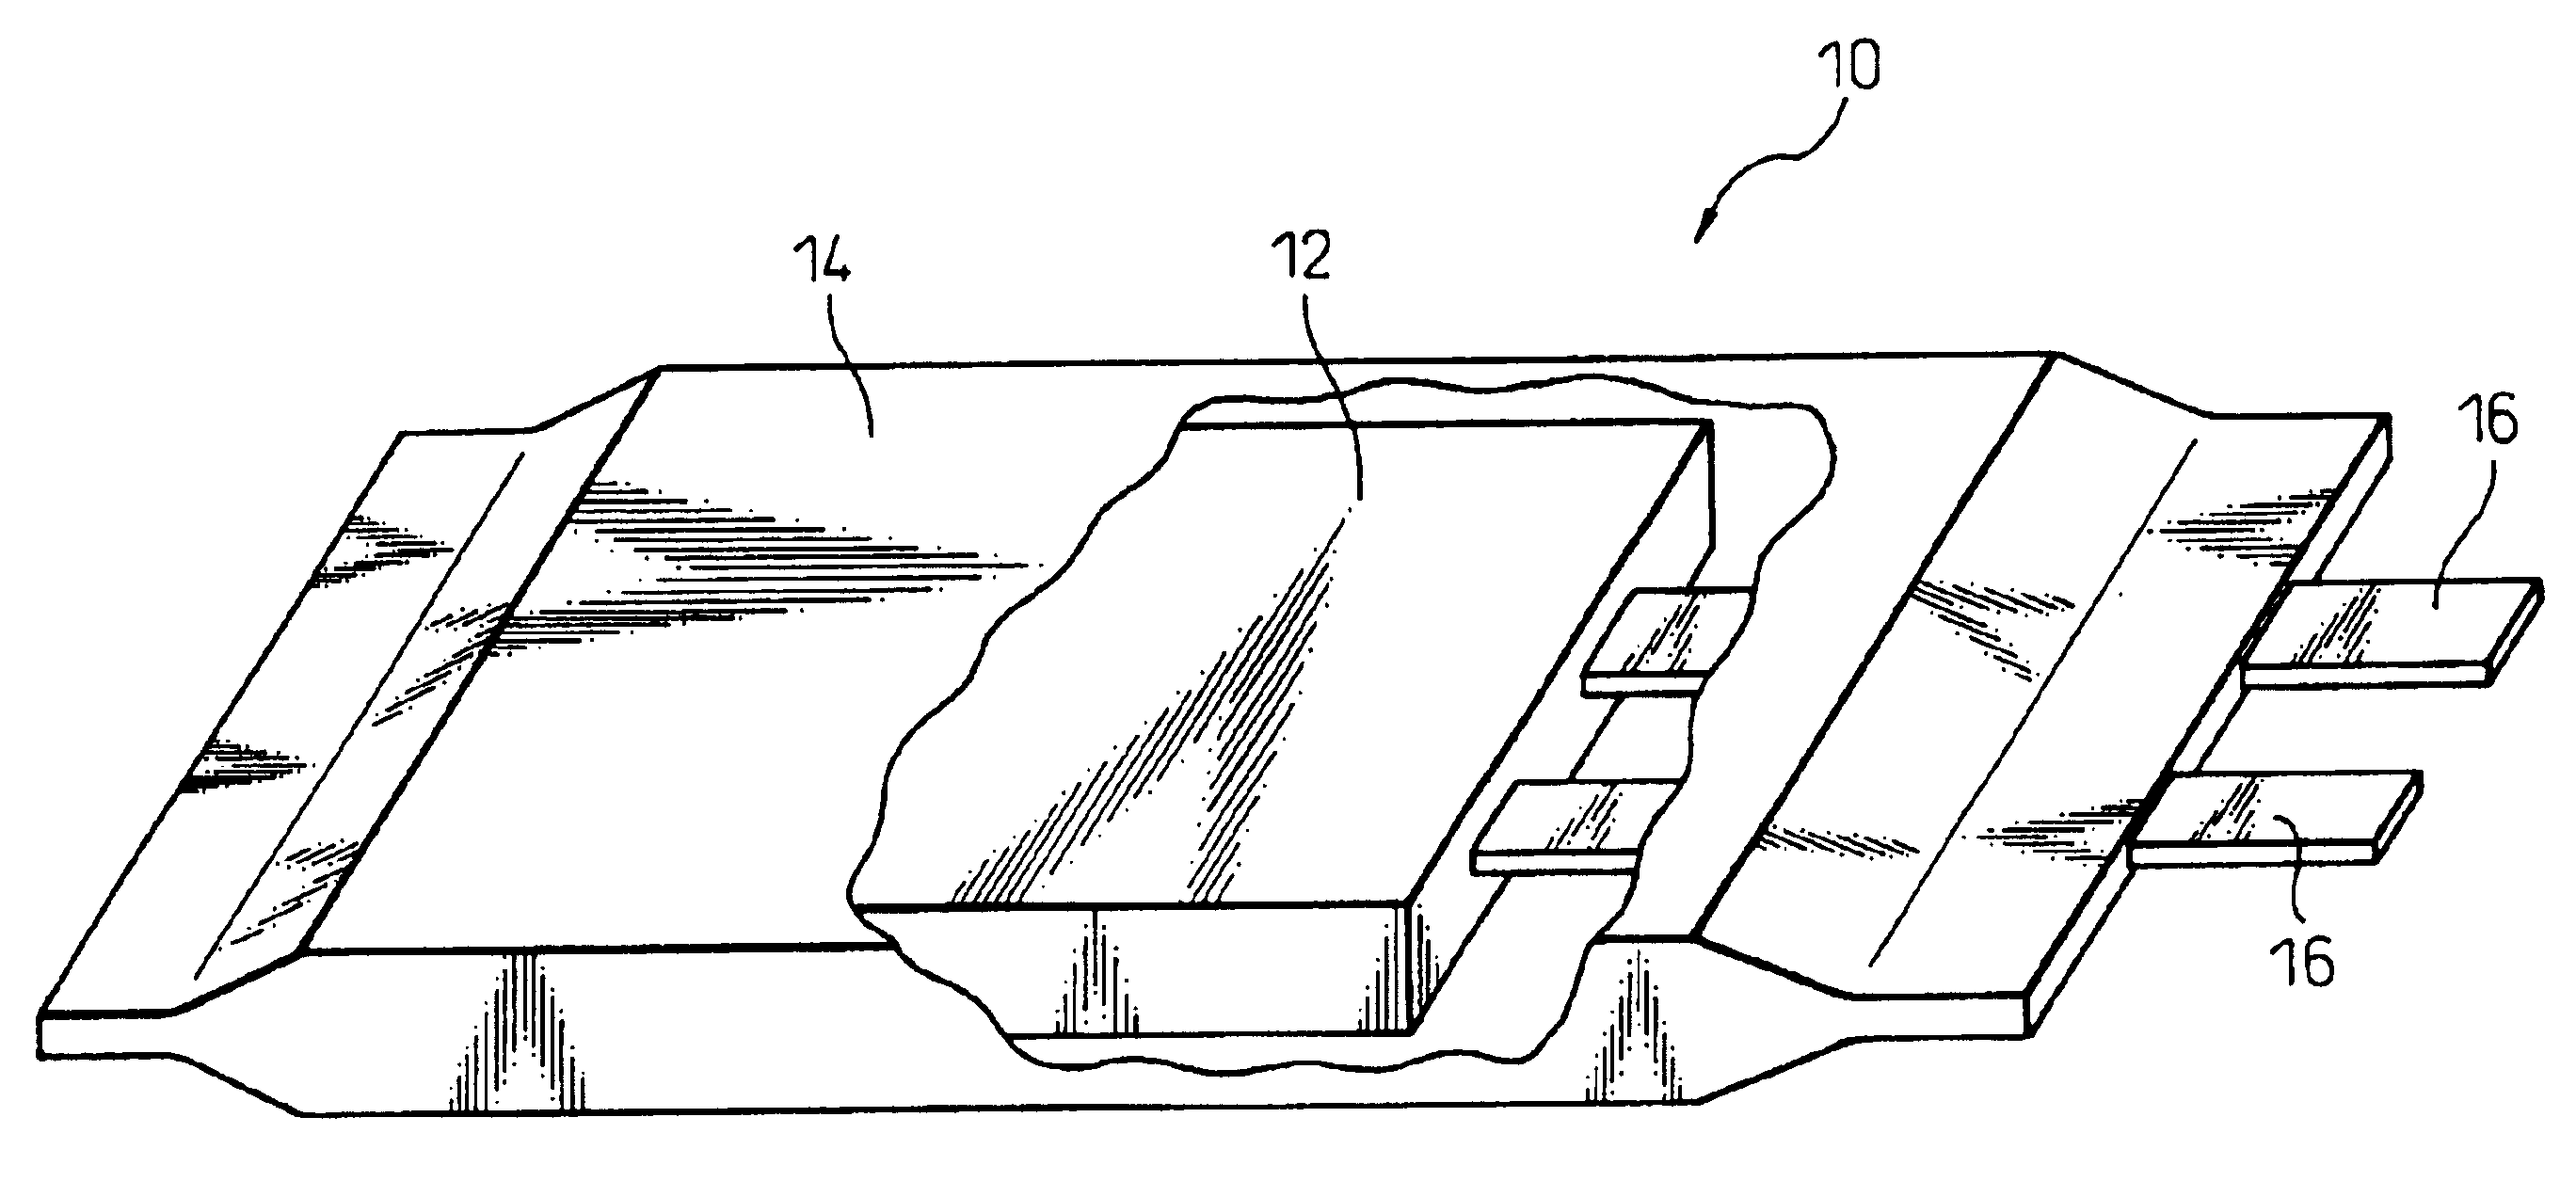 Flat aluminum electrolytic capacitor and method of manufacturing the same